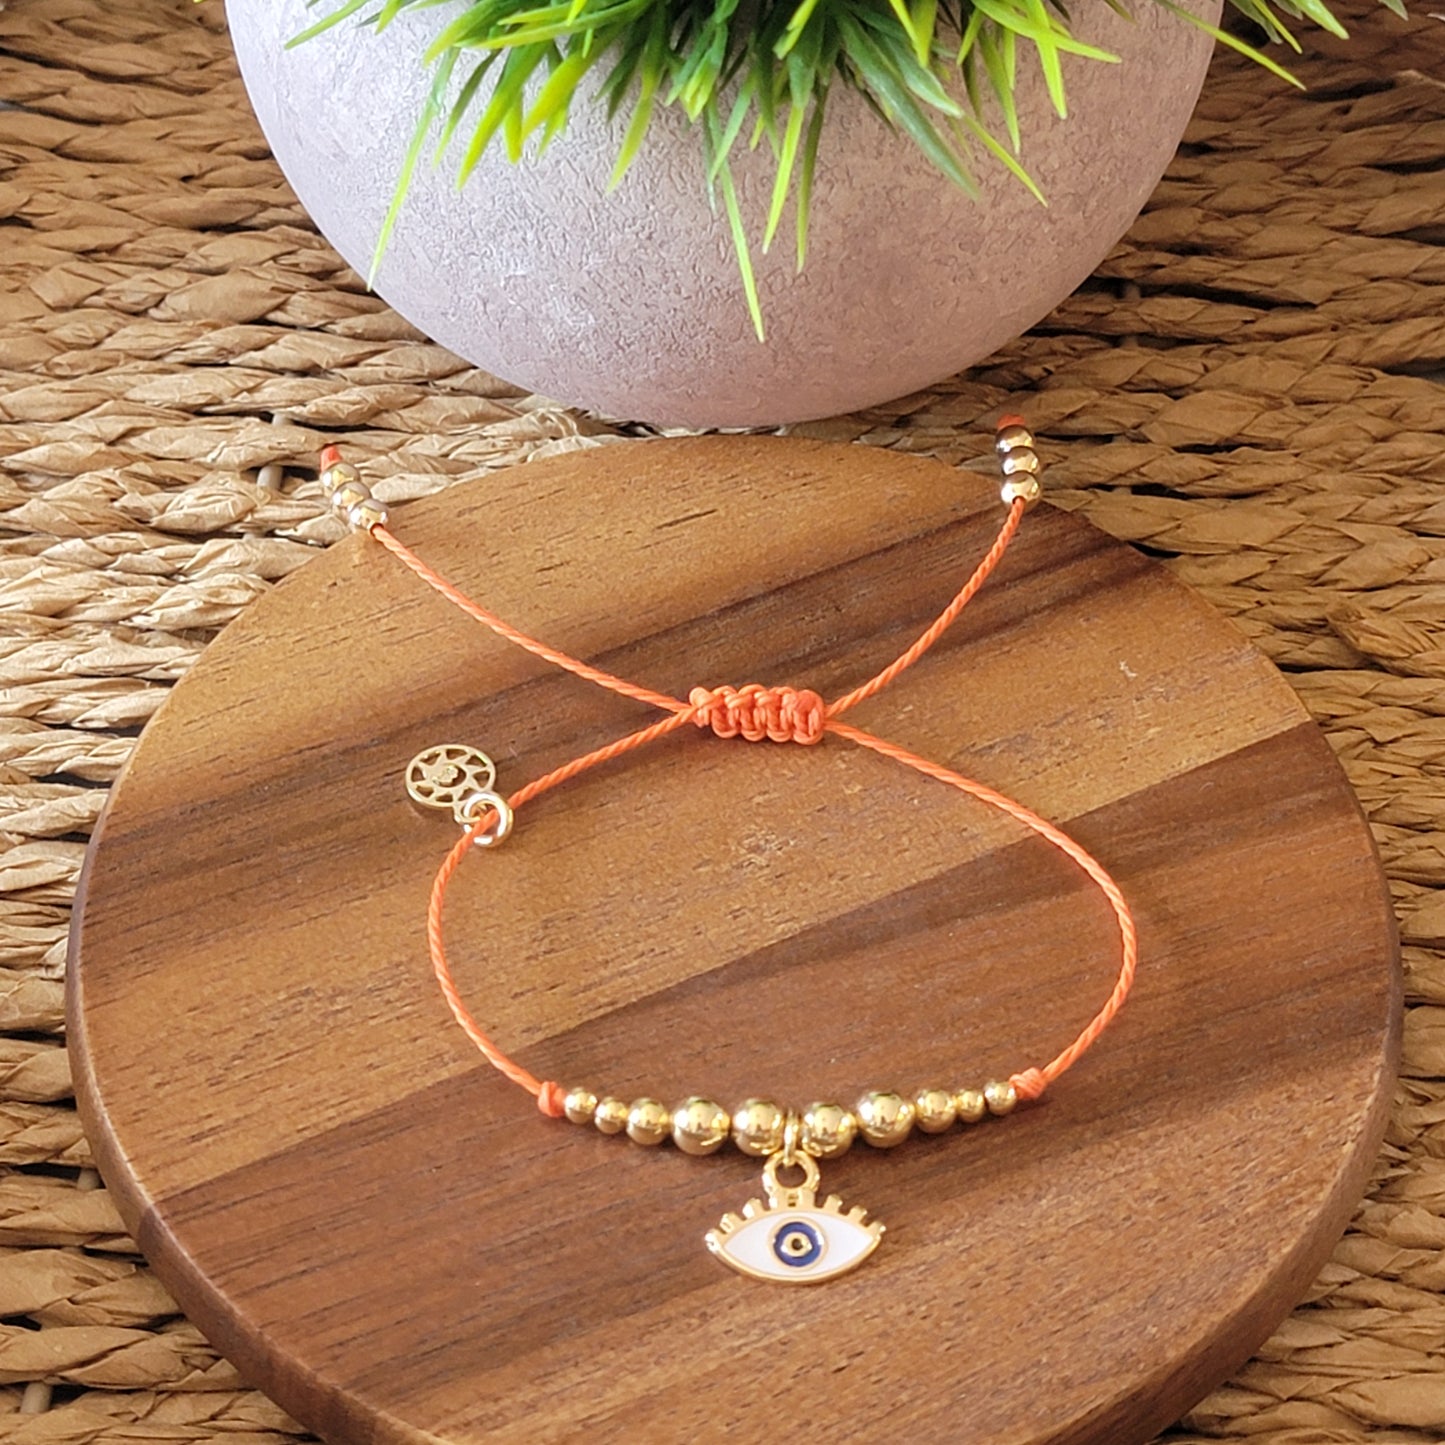 Bracelet with 18k Gold-Filled Small Round Beads and Colored Evil Eye Pendant | Available in Many Colors